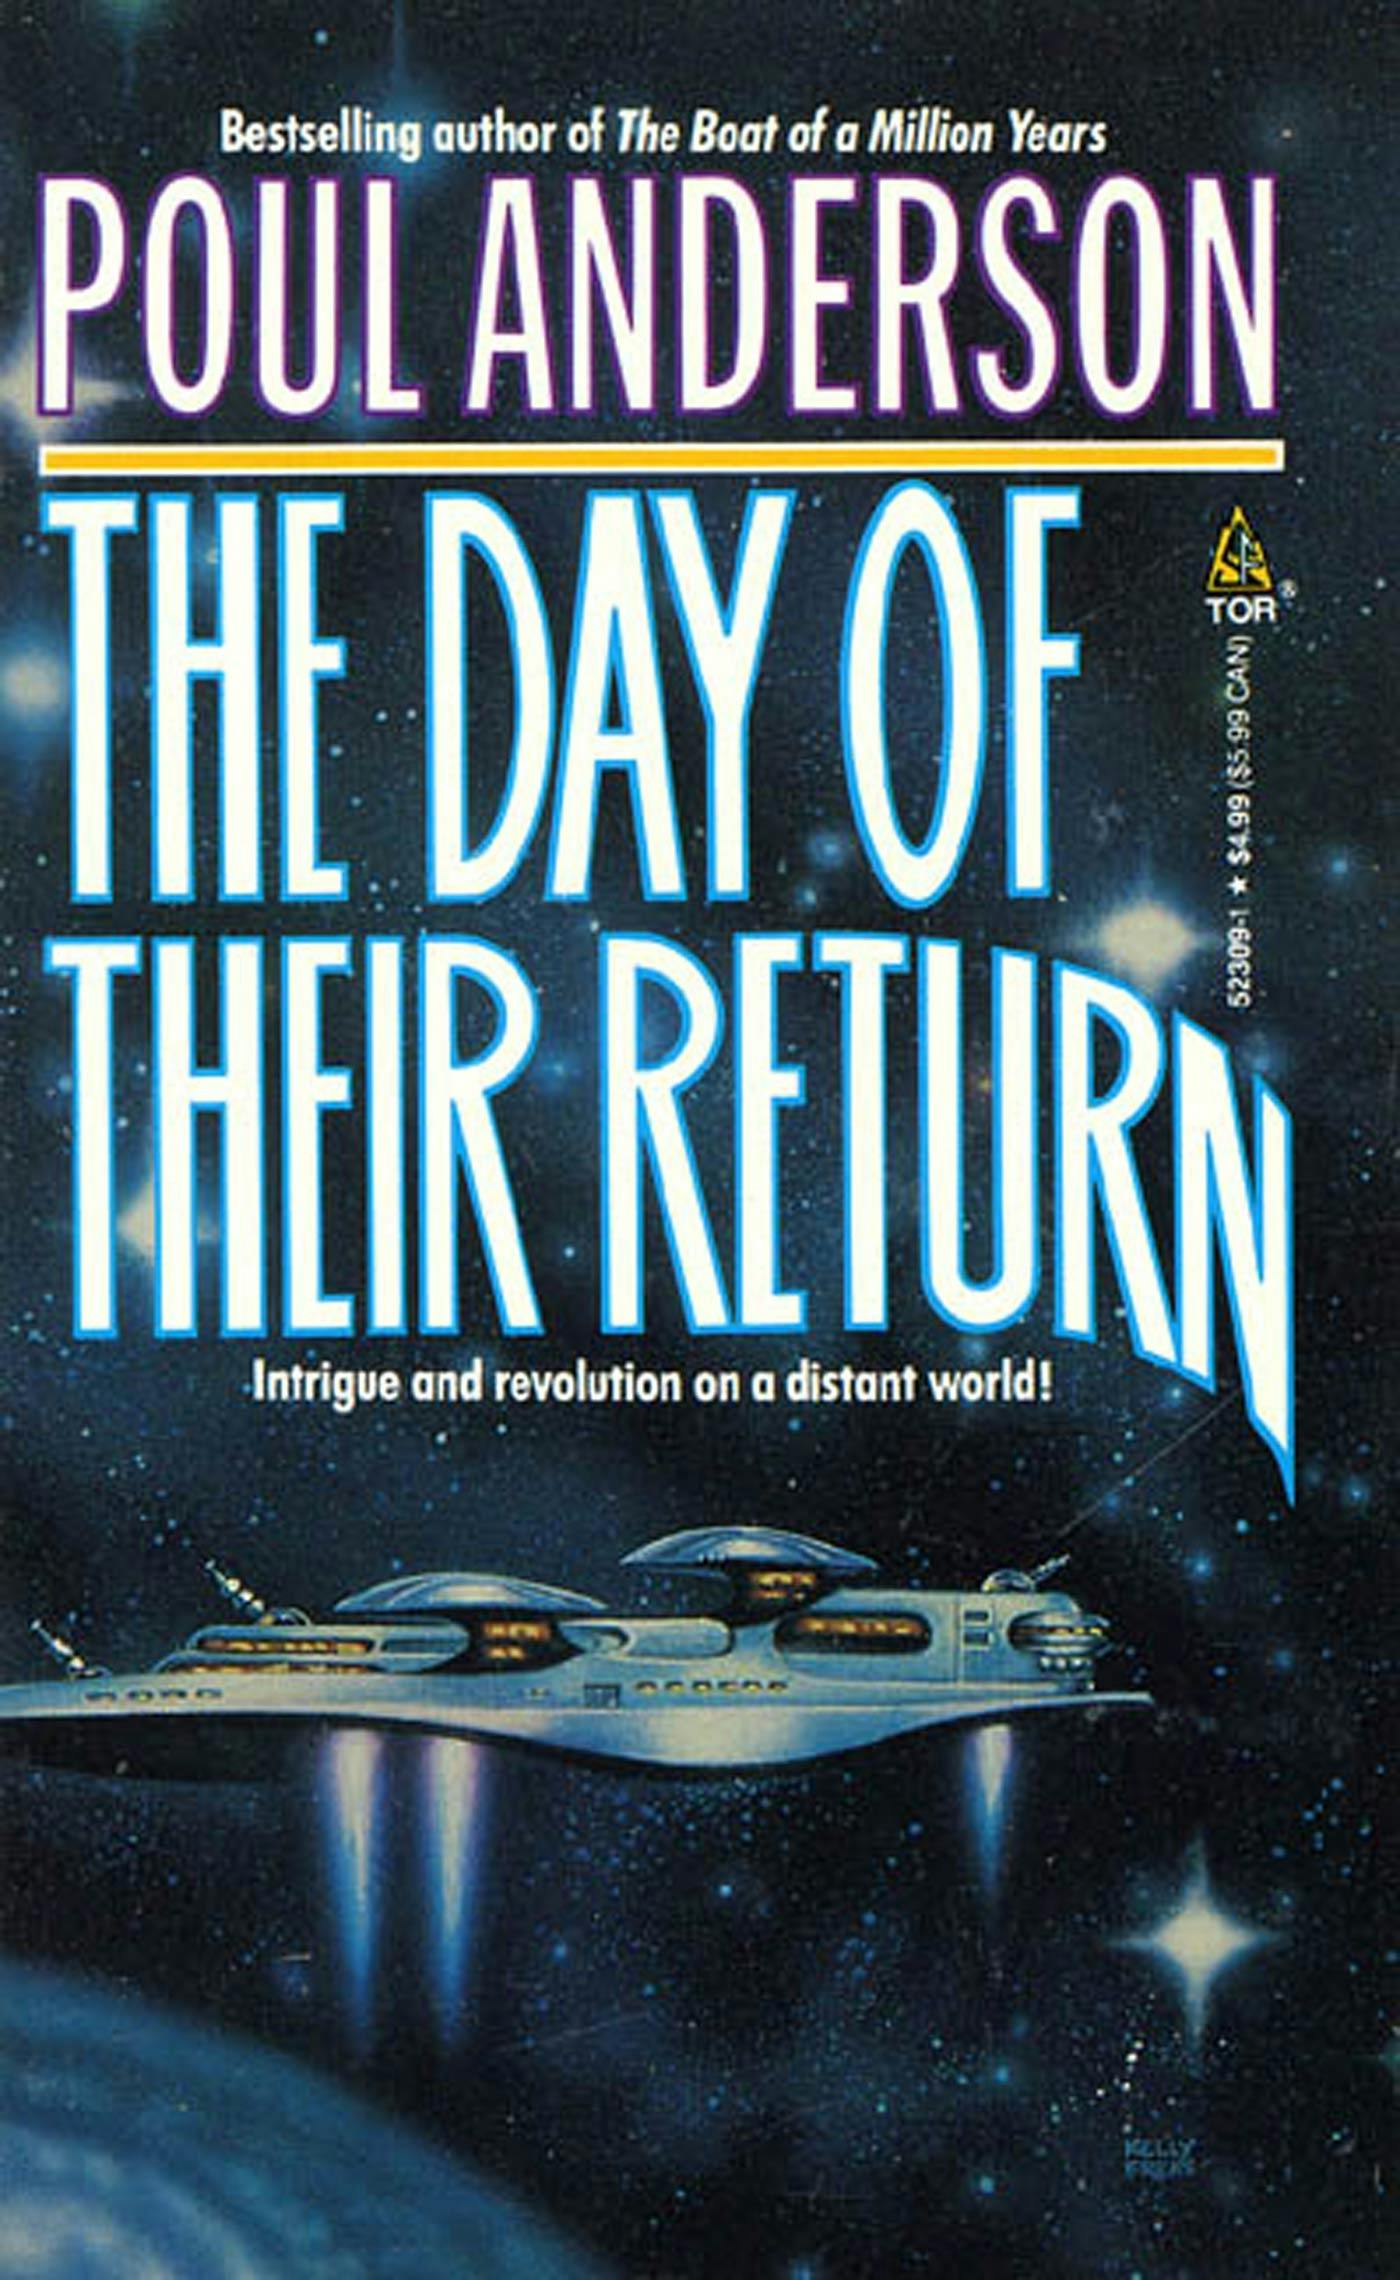 Cover for the book titled as: The Day of Their Return